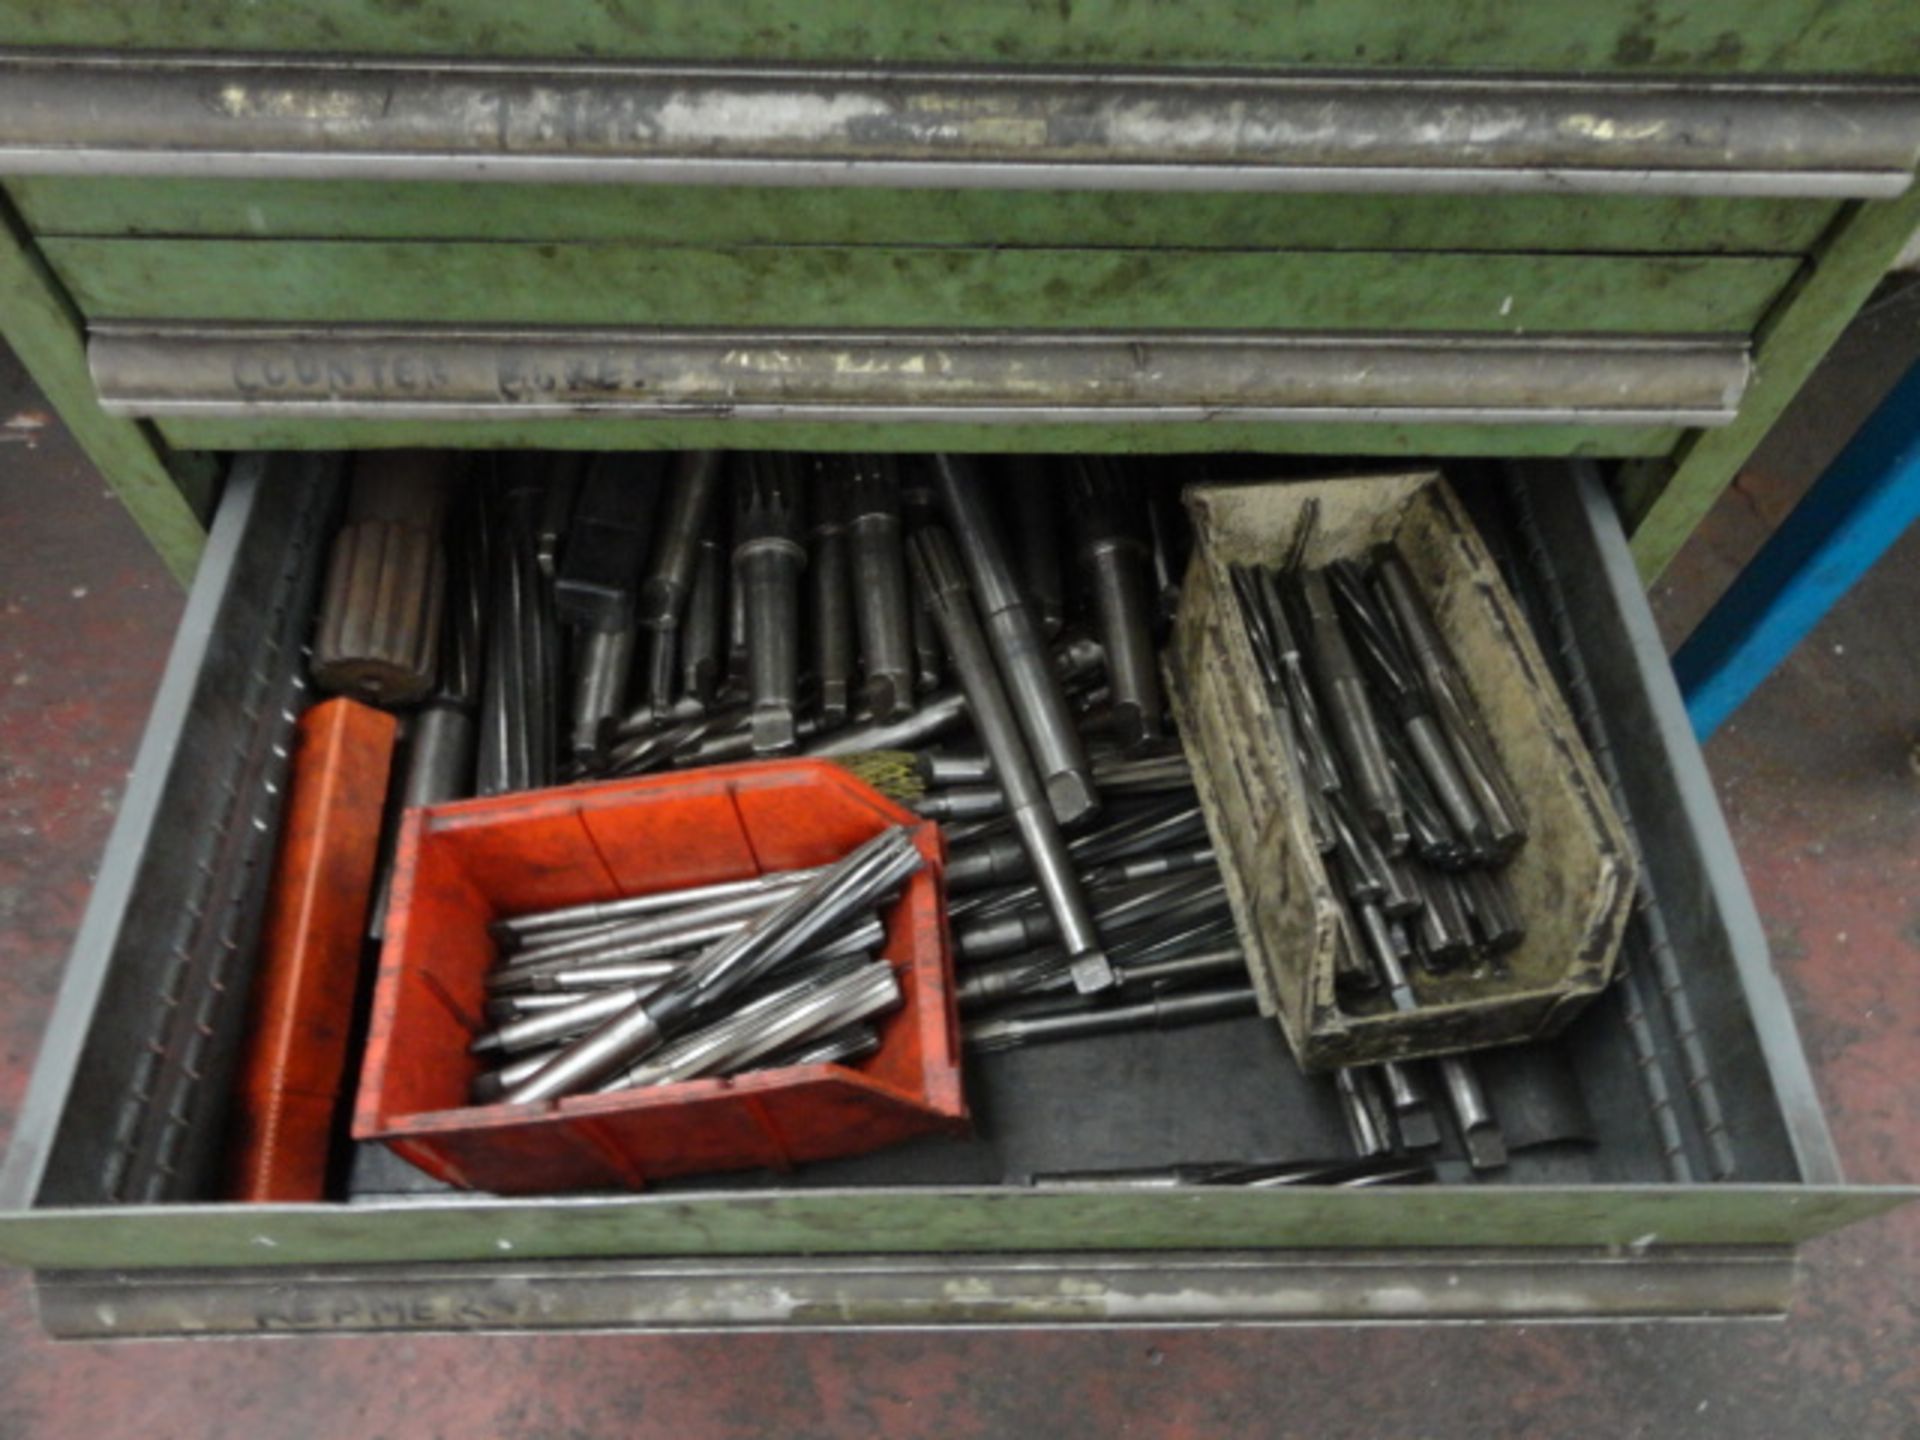 Multi-Compartment Workshop Trolley, with contents including drills, taps and reamers - Image 3 of 3